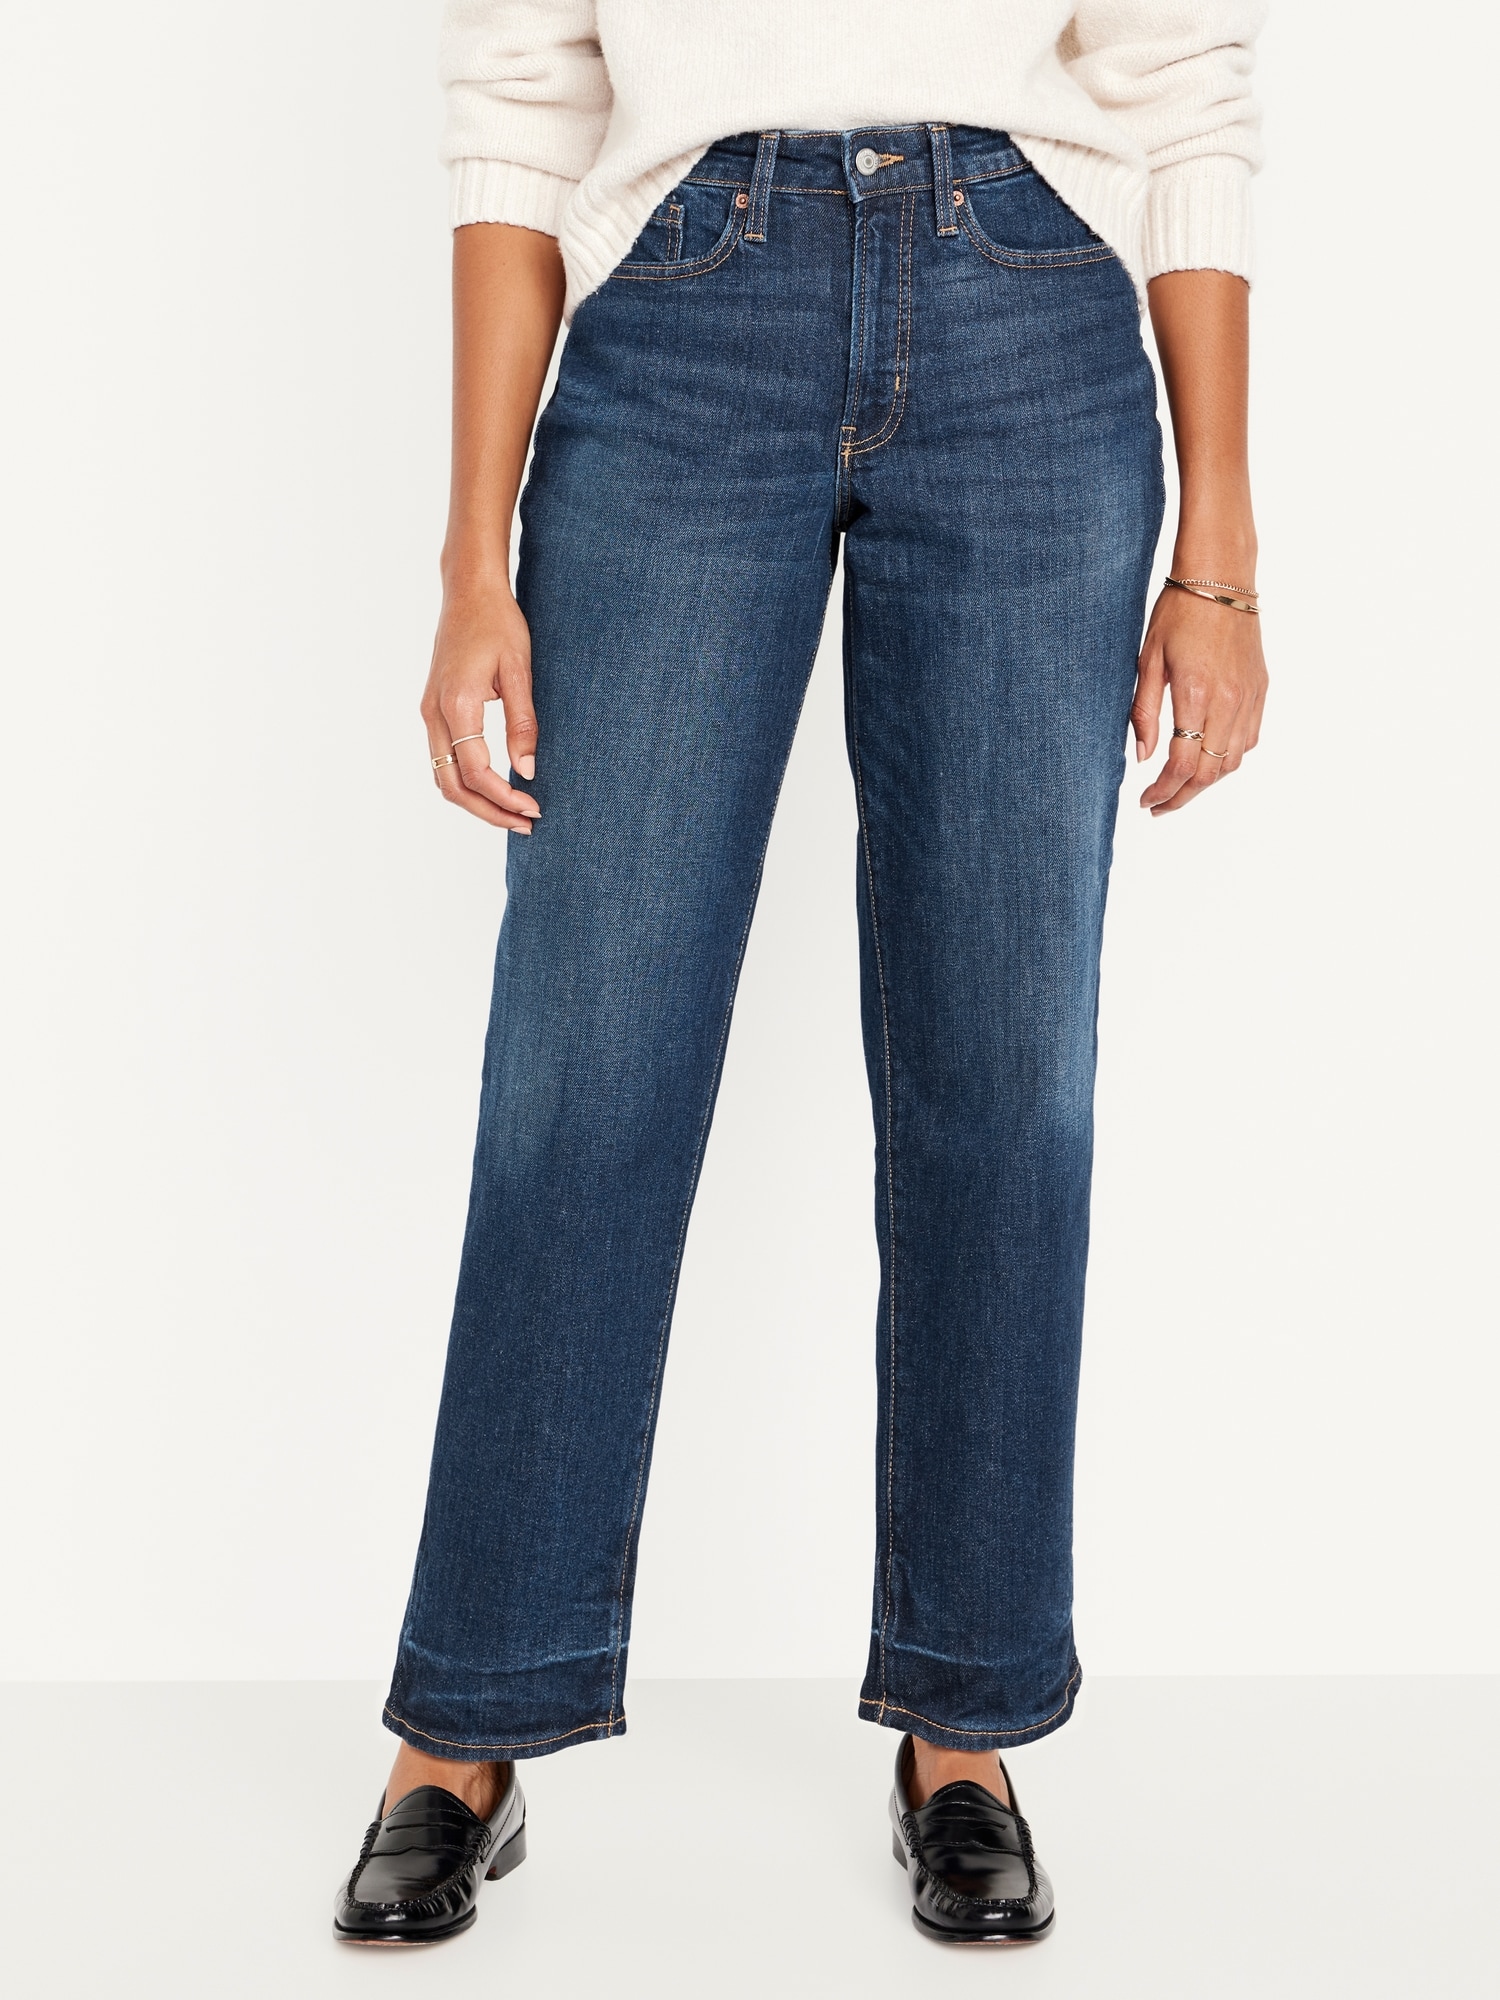 Pacsun's New Jeans Cater to Curvy Consumers